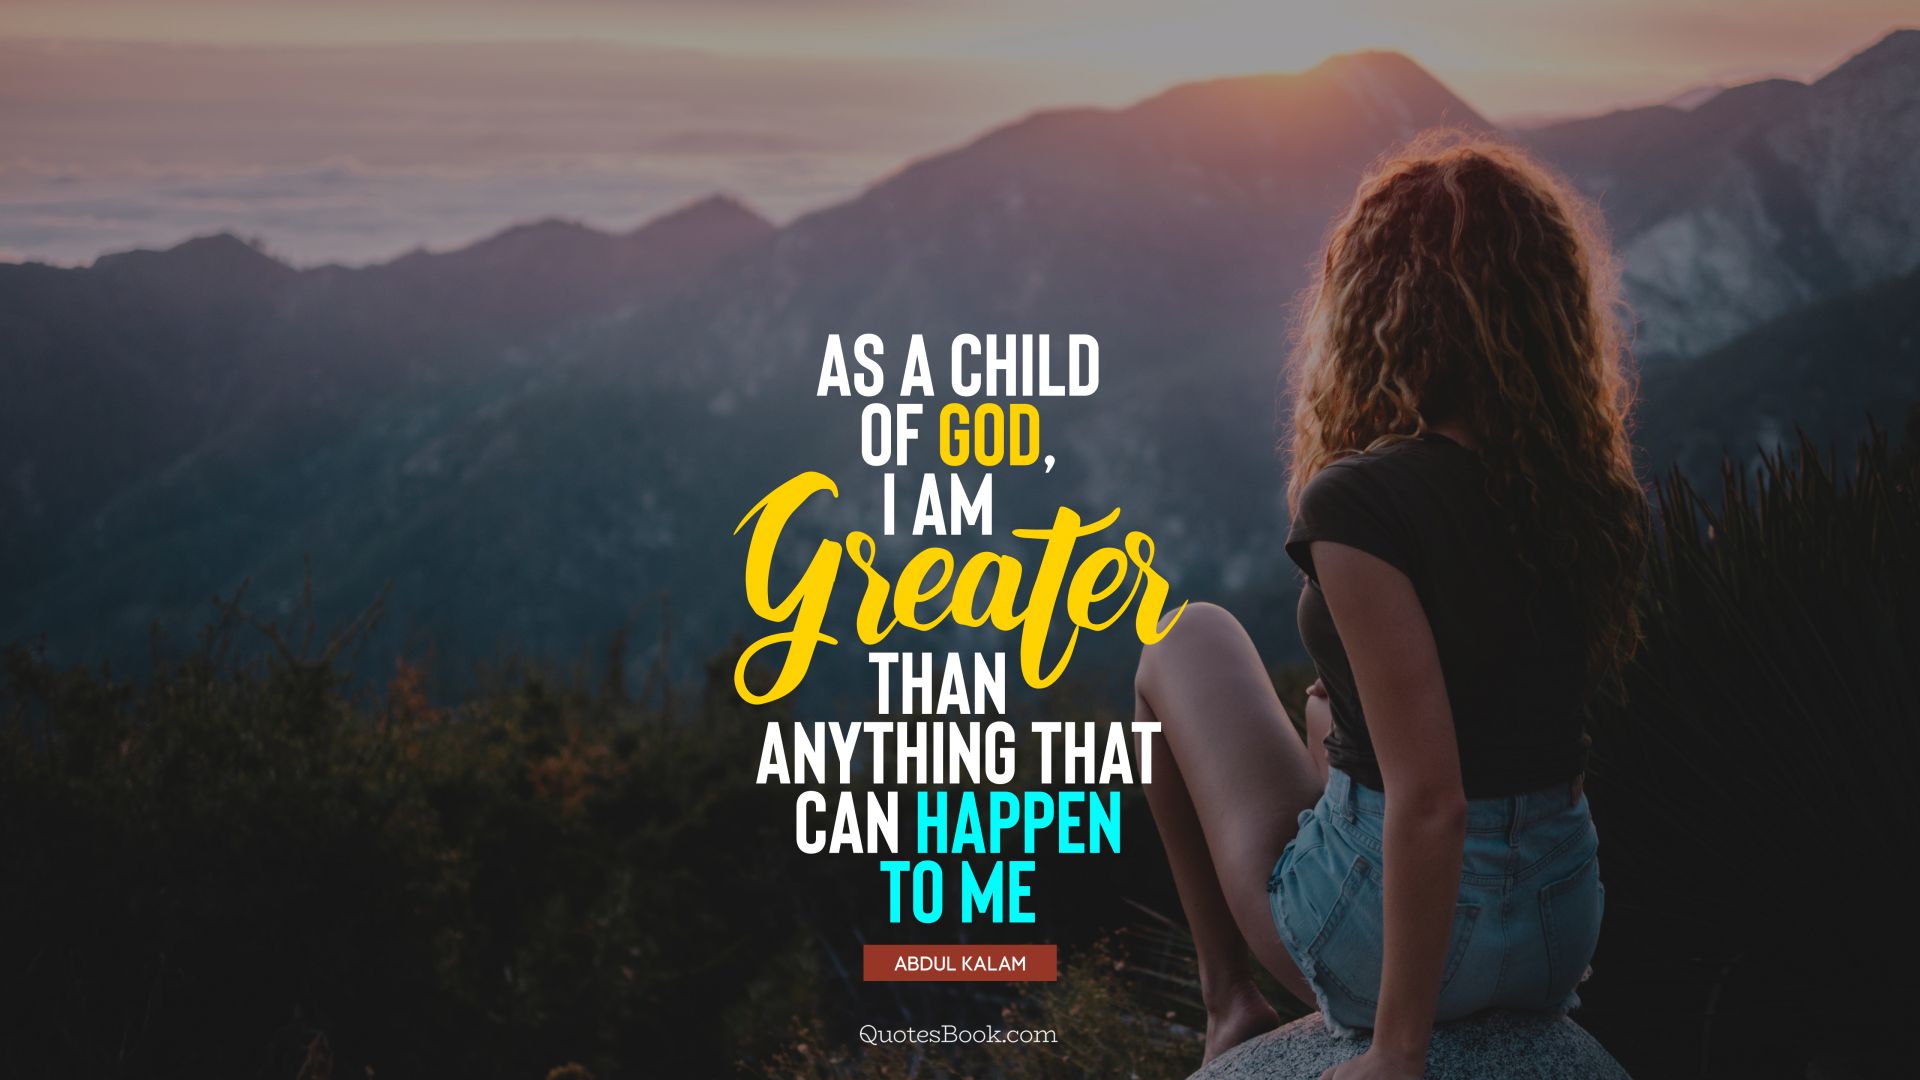 As a child of God, I am greater than anything that can happen to me. - Quote by Abdul Kalam